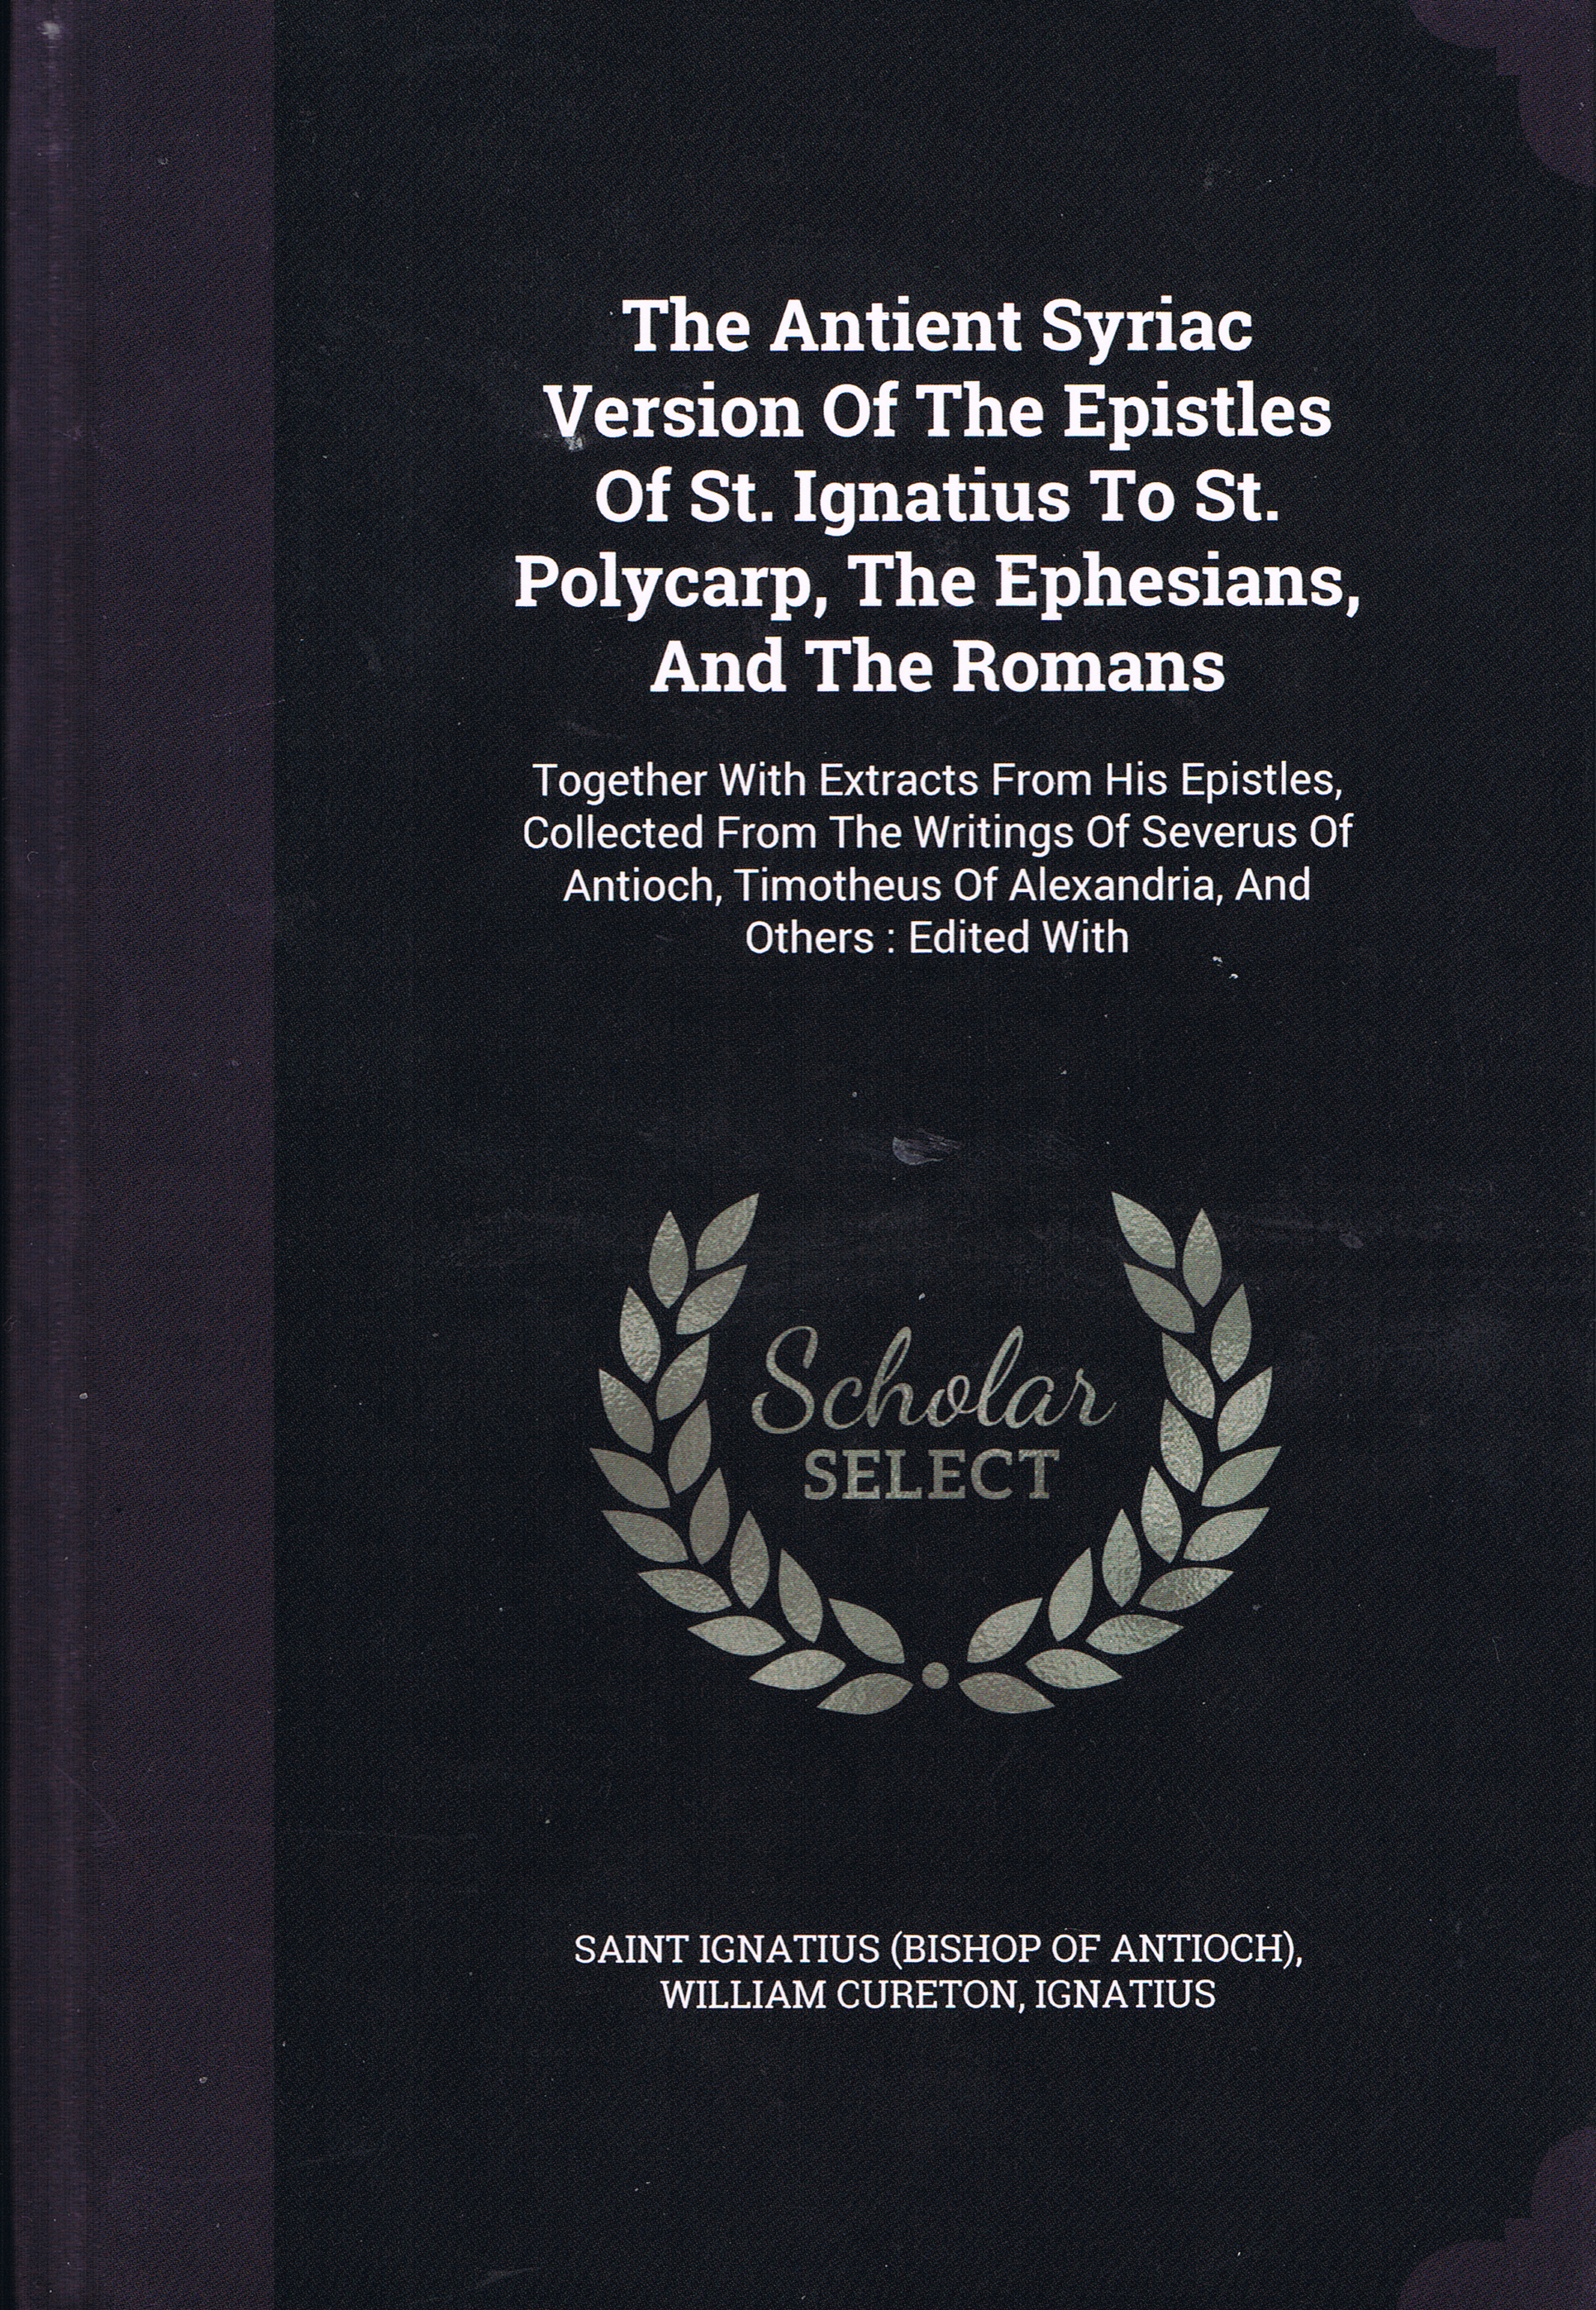 The Ancient Syriac Version Of The Epistles Of St. Ignatius To St. Polycarp, The Ephesians, And The Romans